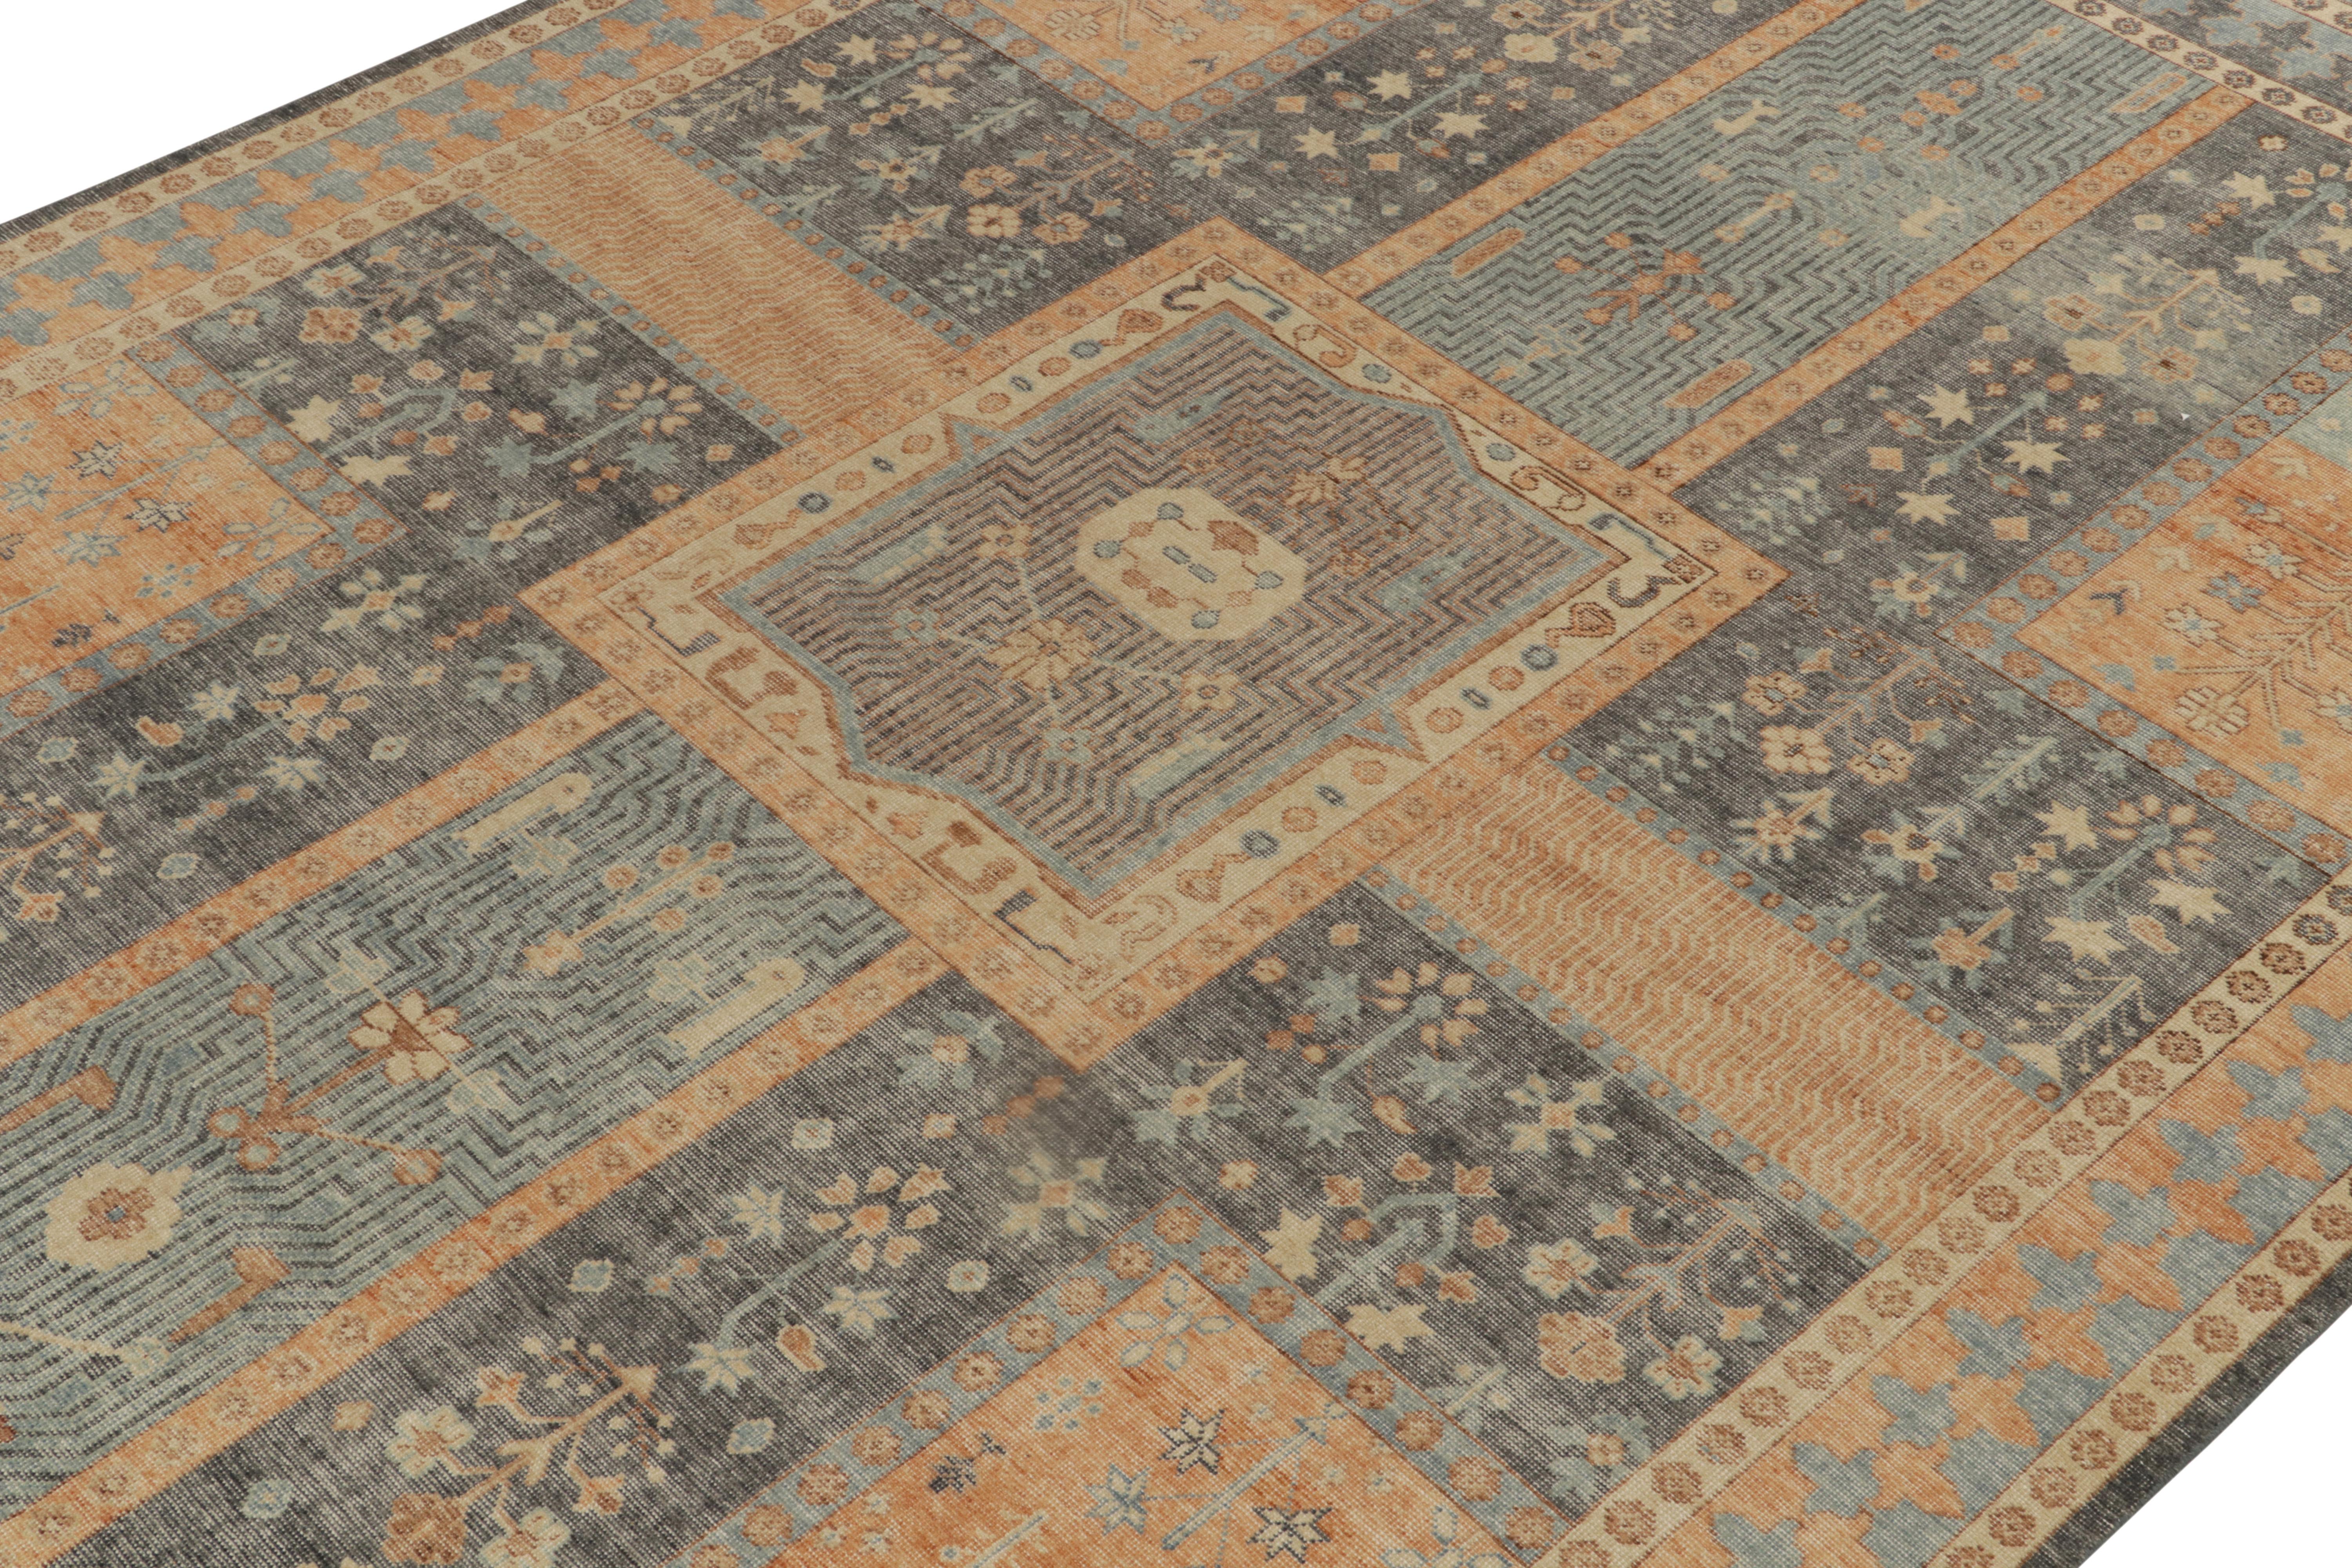 Indian Rug & Kilim’s Distressed Persian Style Rug in Blue & Orange Garden Pattern For Sale